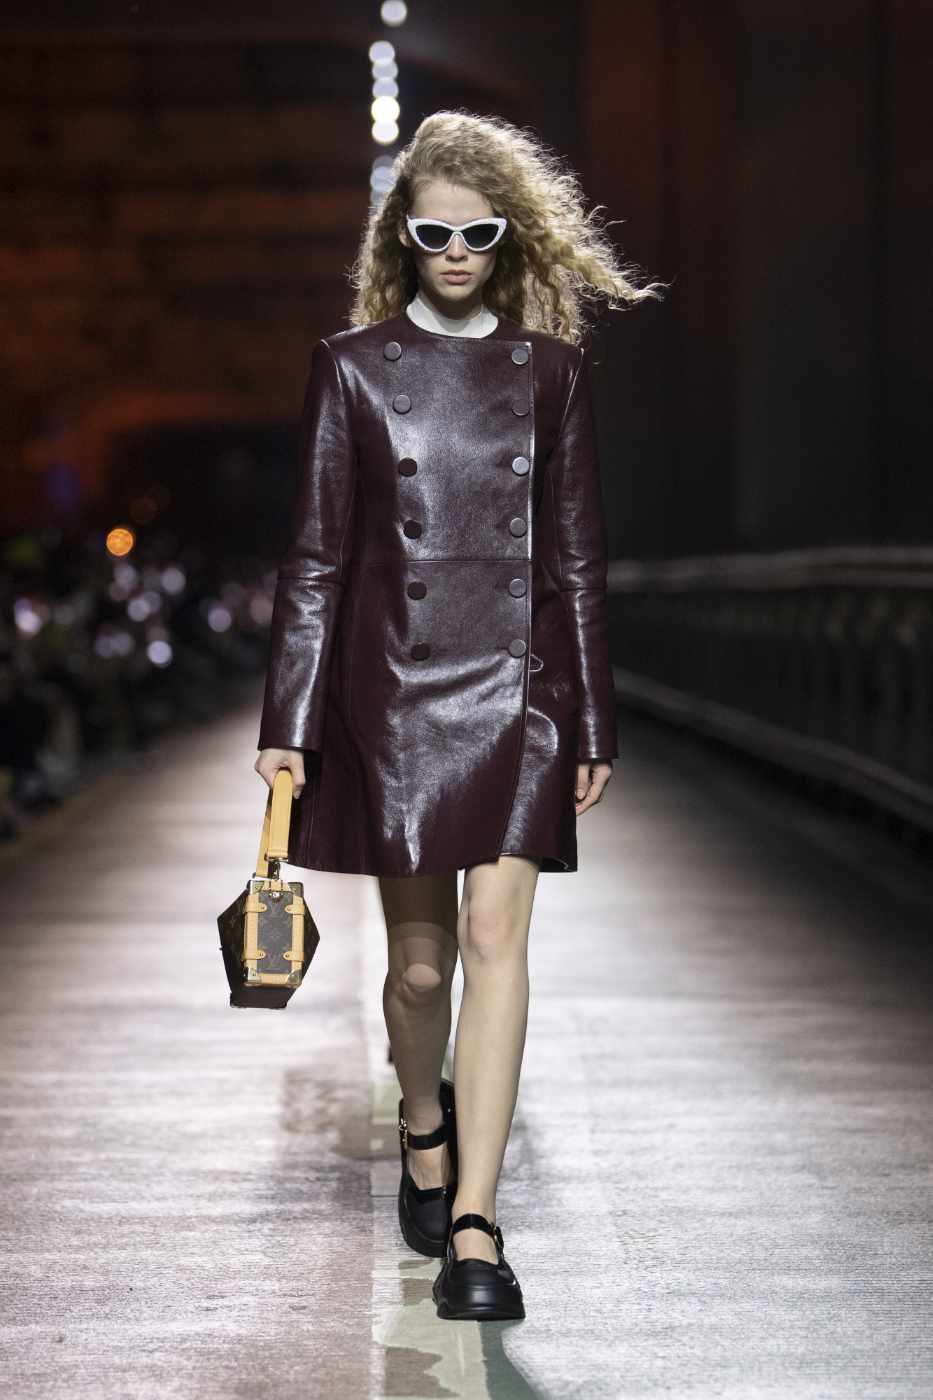 Super excited! Louis Vuitton launches LV², an eclectic Pre-Fall